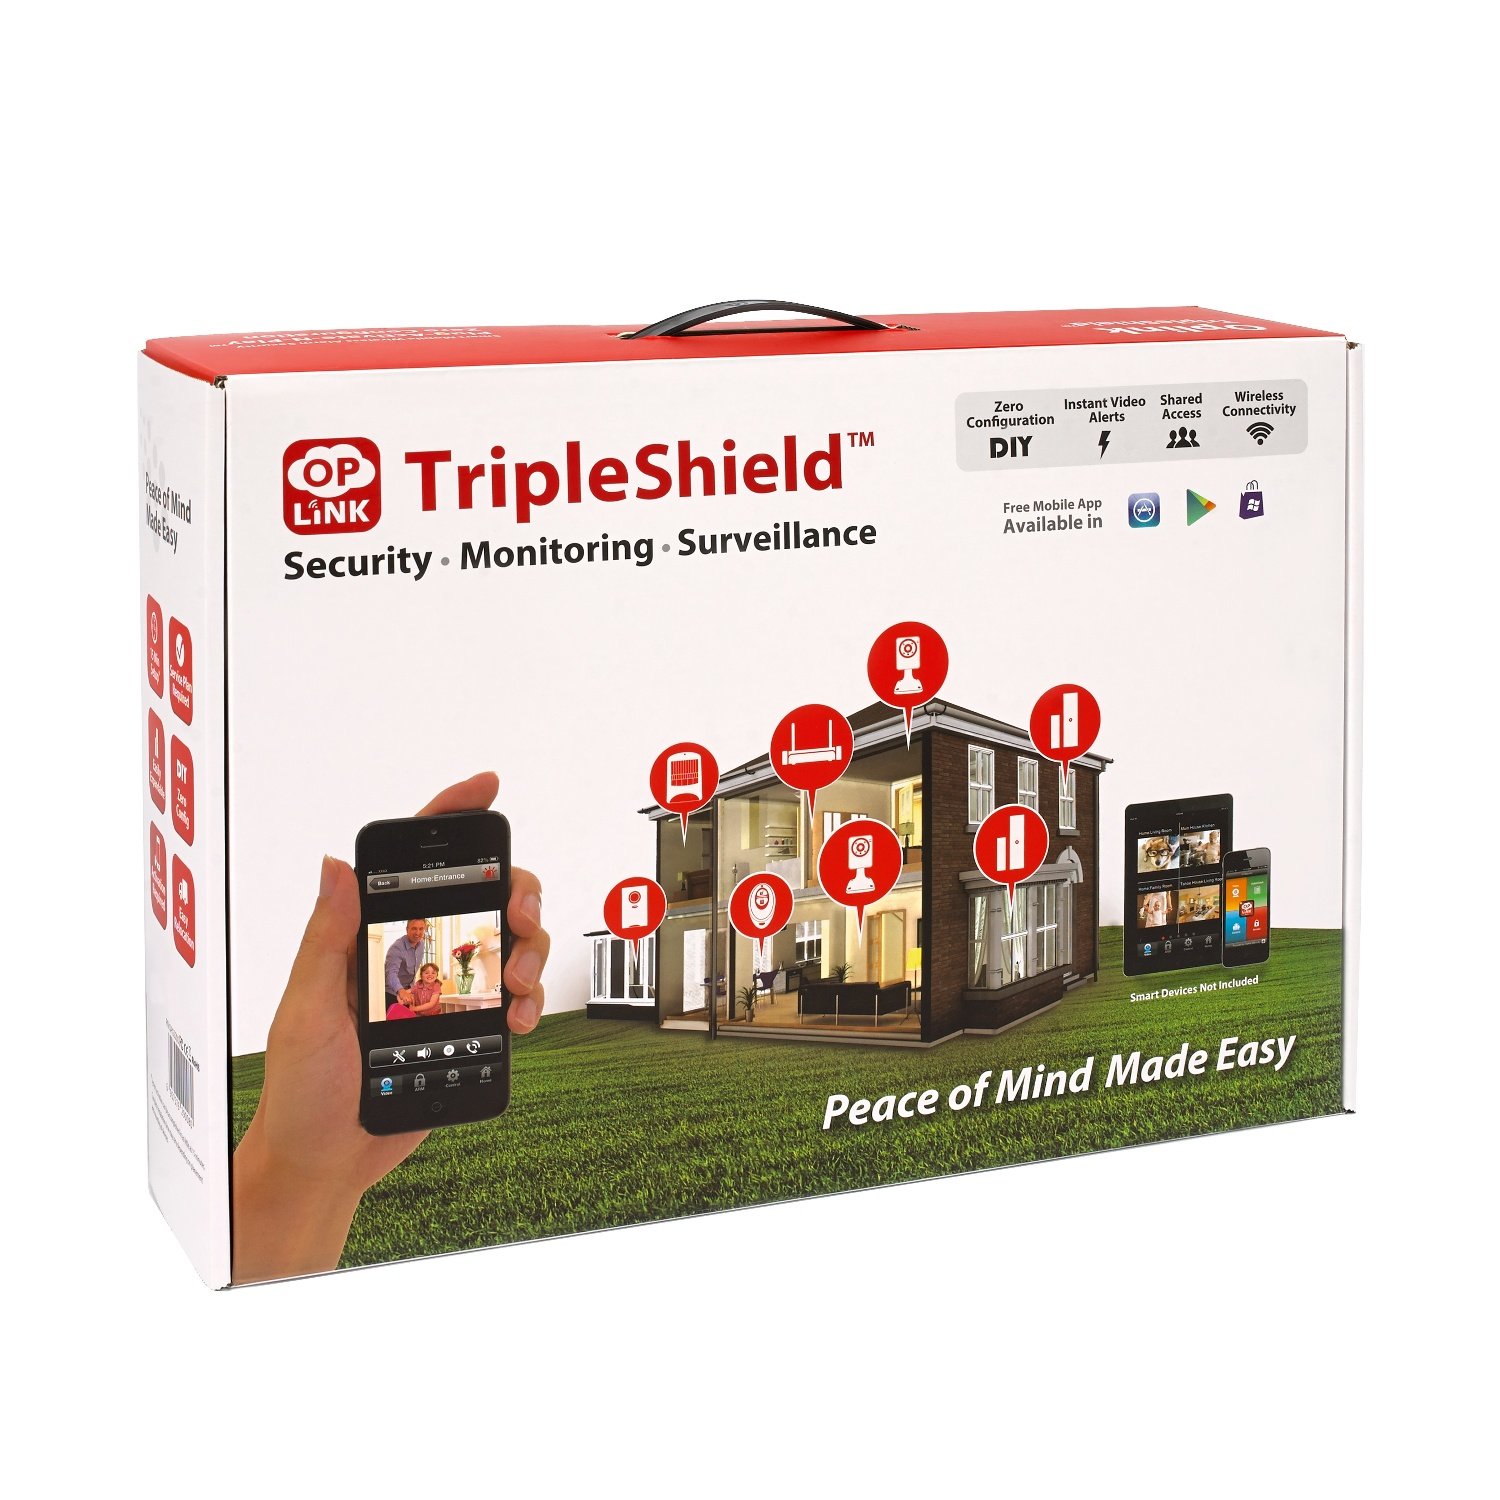 Home8 Oplink Video-Verified TripleShield Alarm System (2-Cam) - Wireless Home Security System with IP-Cameras, Alarm Sensors, Indoor Siren, and Free Basic Service, featuring Amazon Alexa Integration